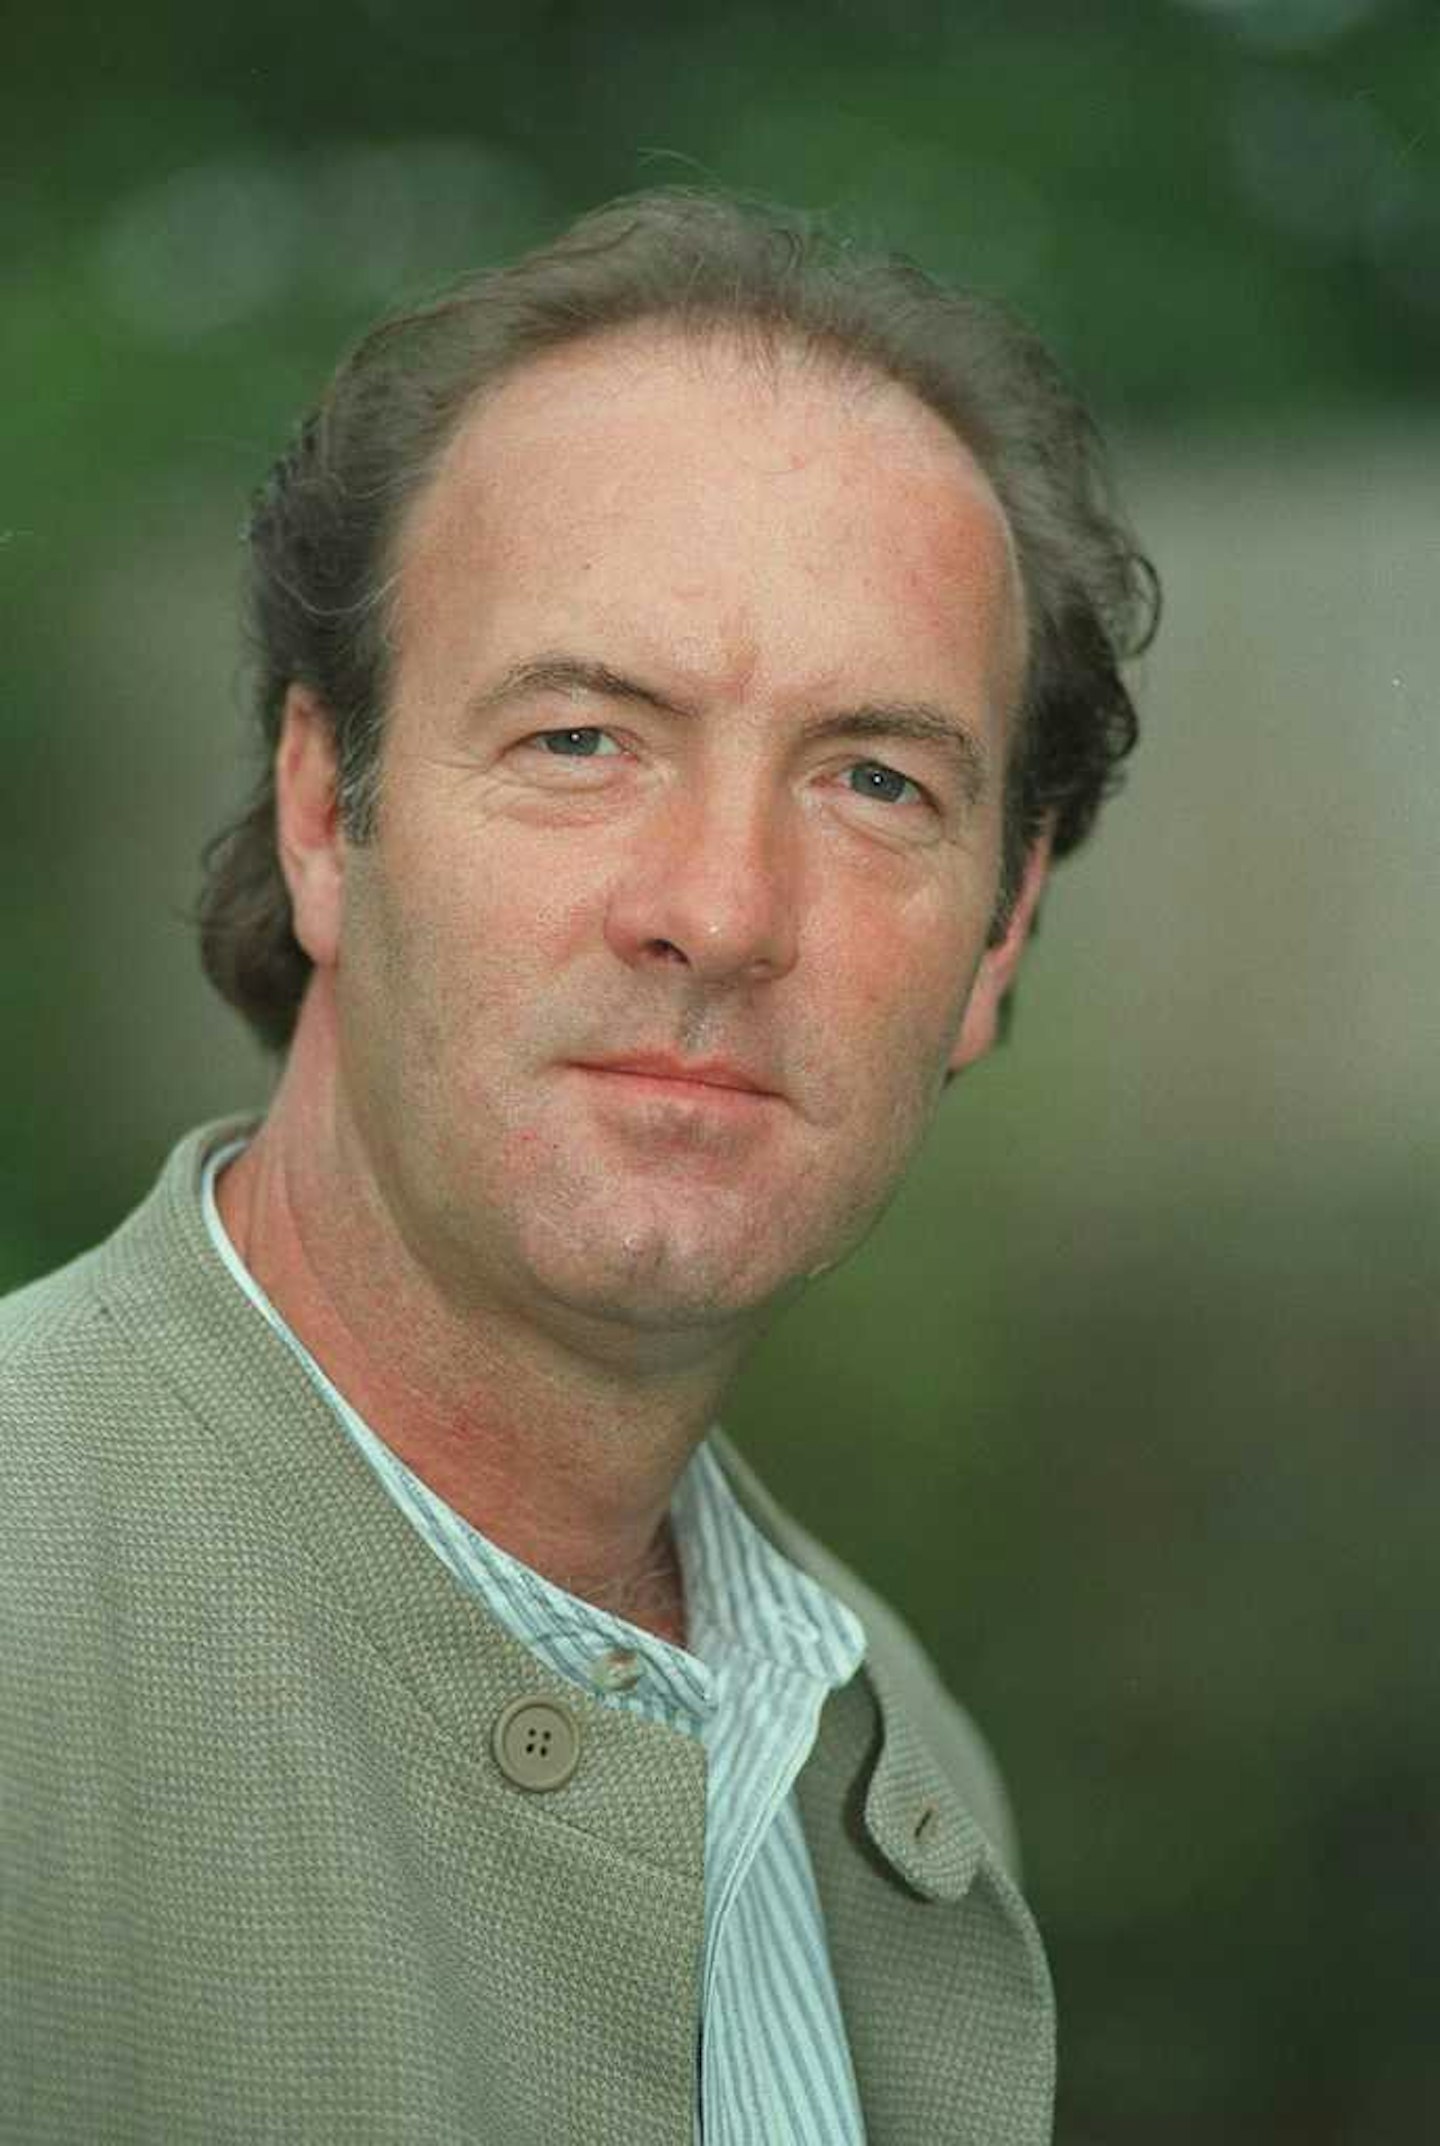 5. Jimmy Corkhill (particularly Jimmy on drugs)